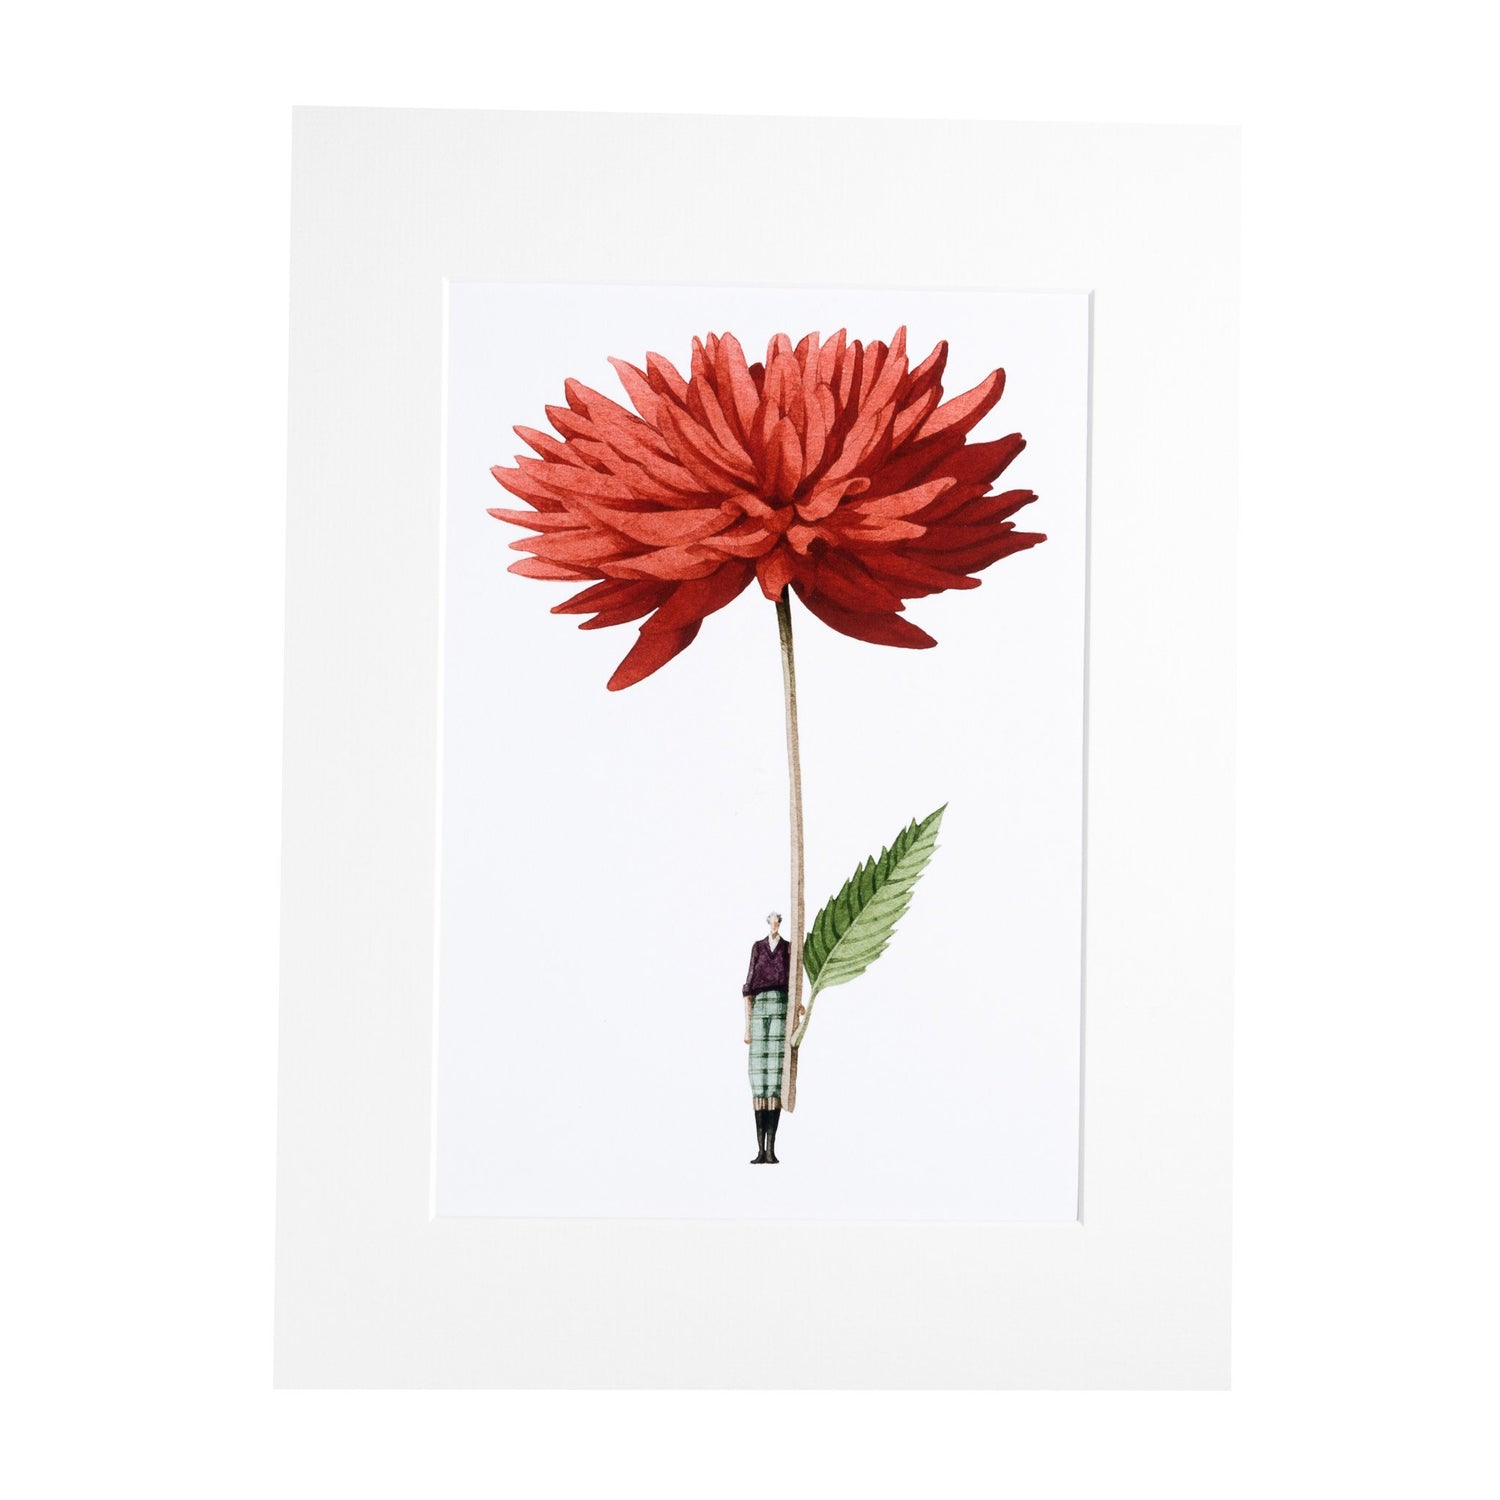 mounted print, print, art print, made in england, archival paper, giclee print, dahlia, illustration, flowers